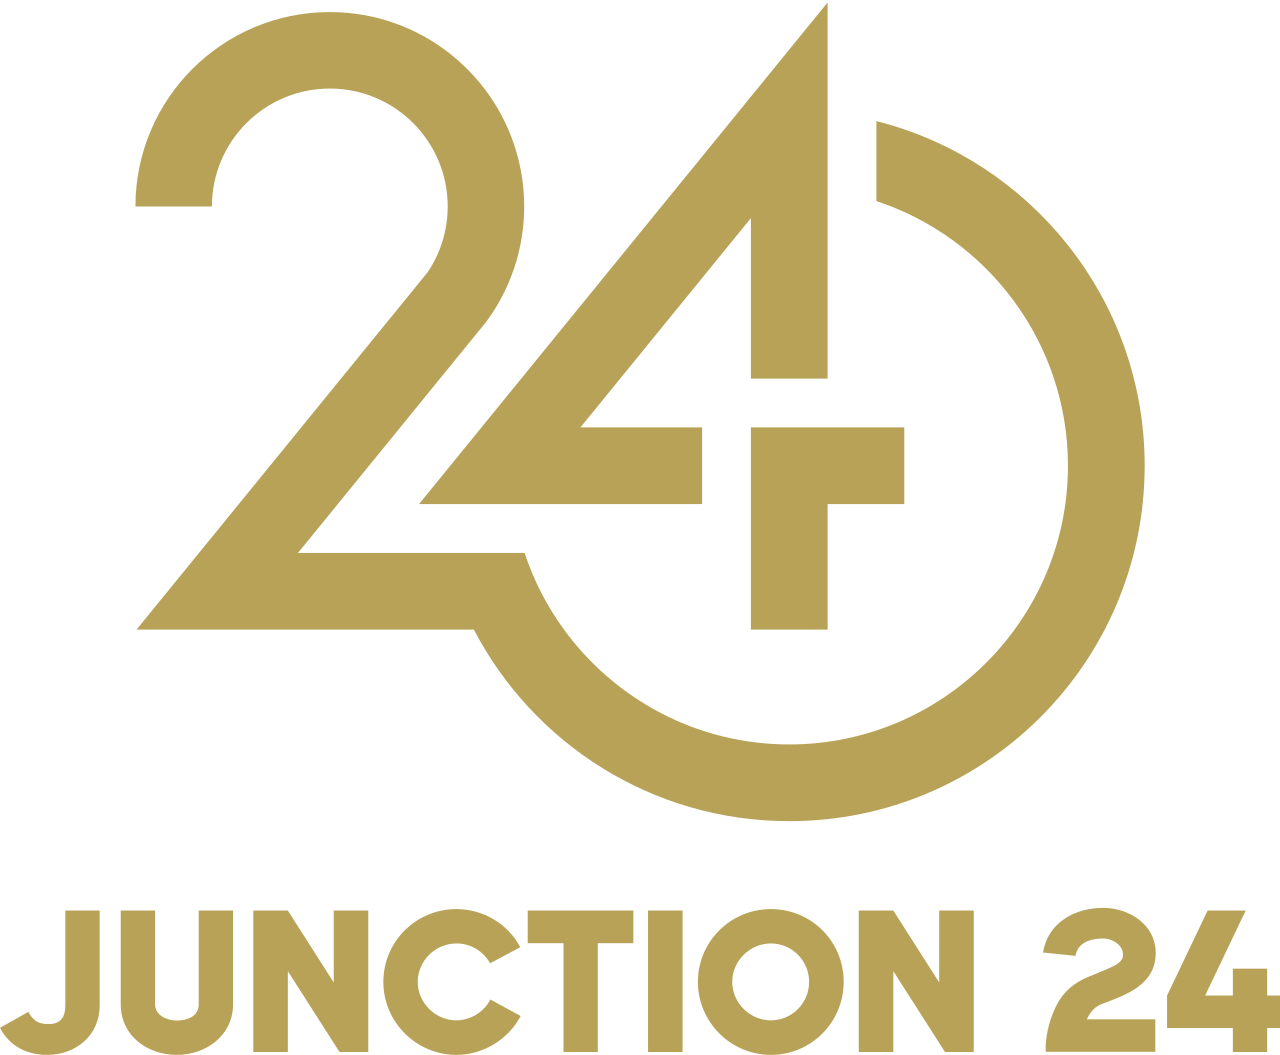 Junction 24's web page